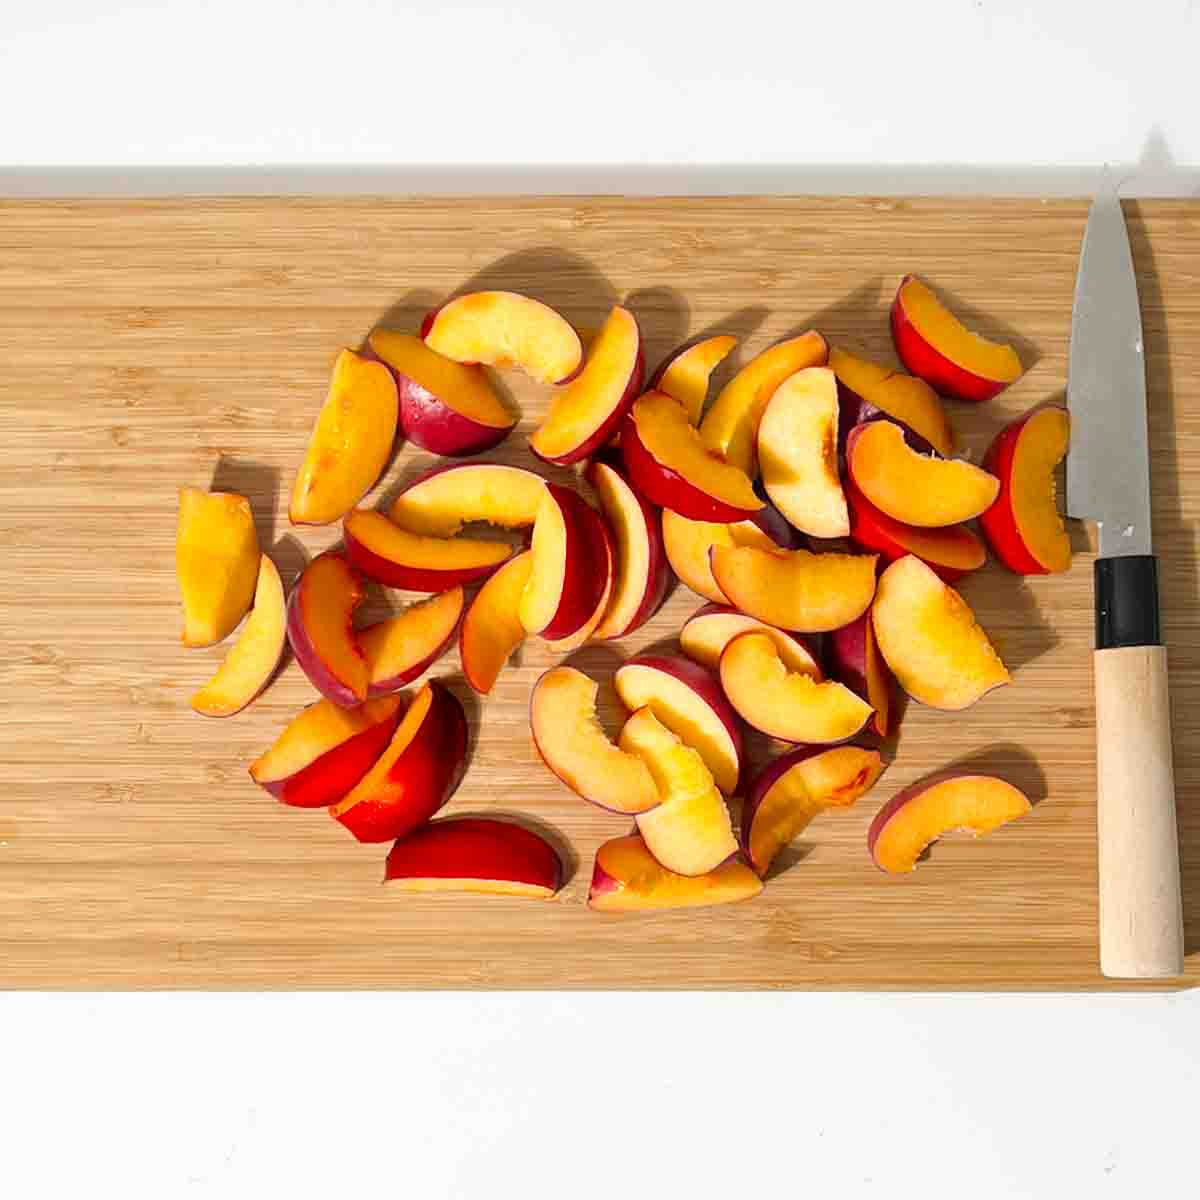 Sliced nectarines for the nectarine salad on a chopping board.